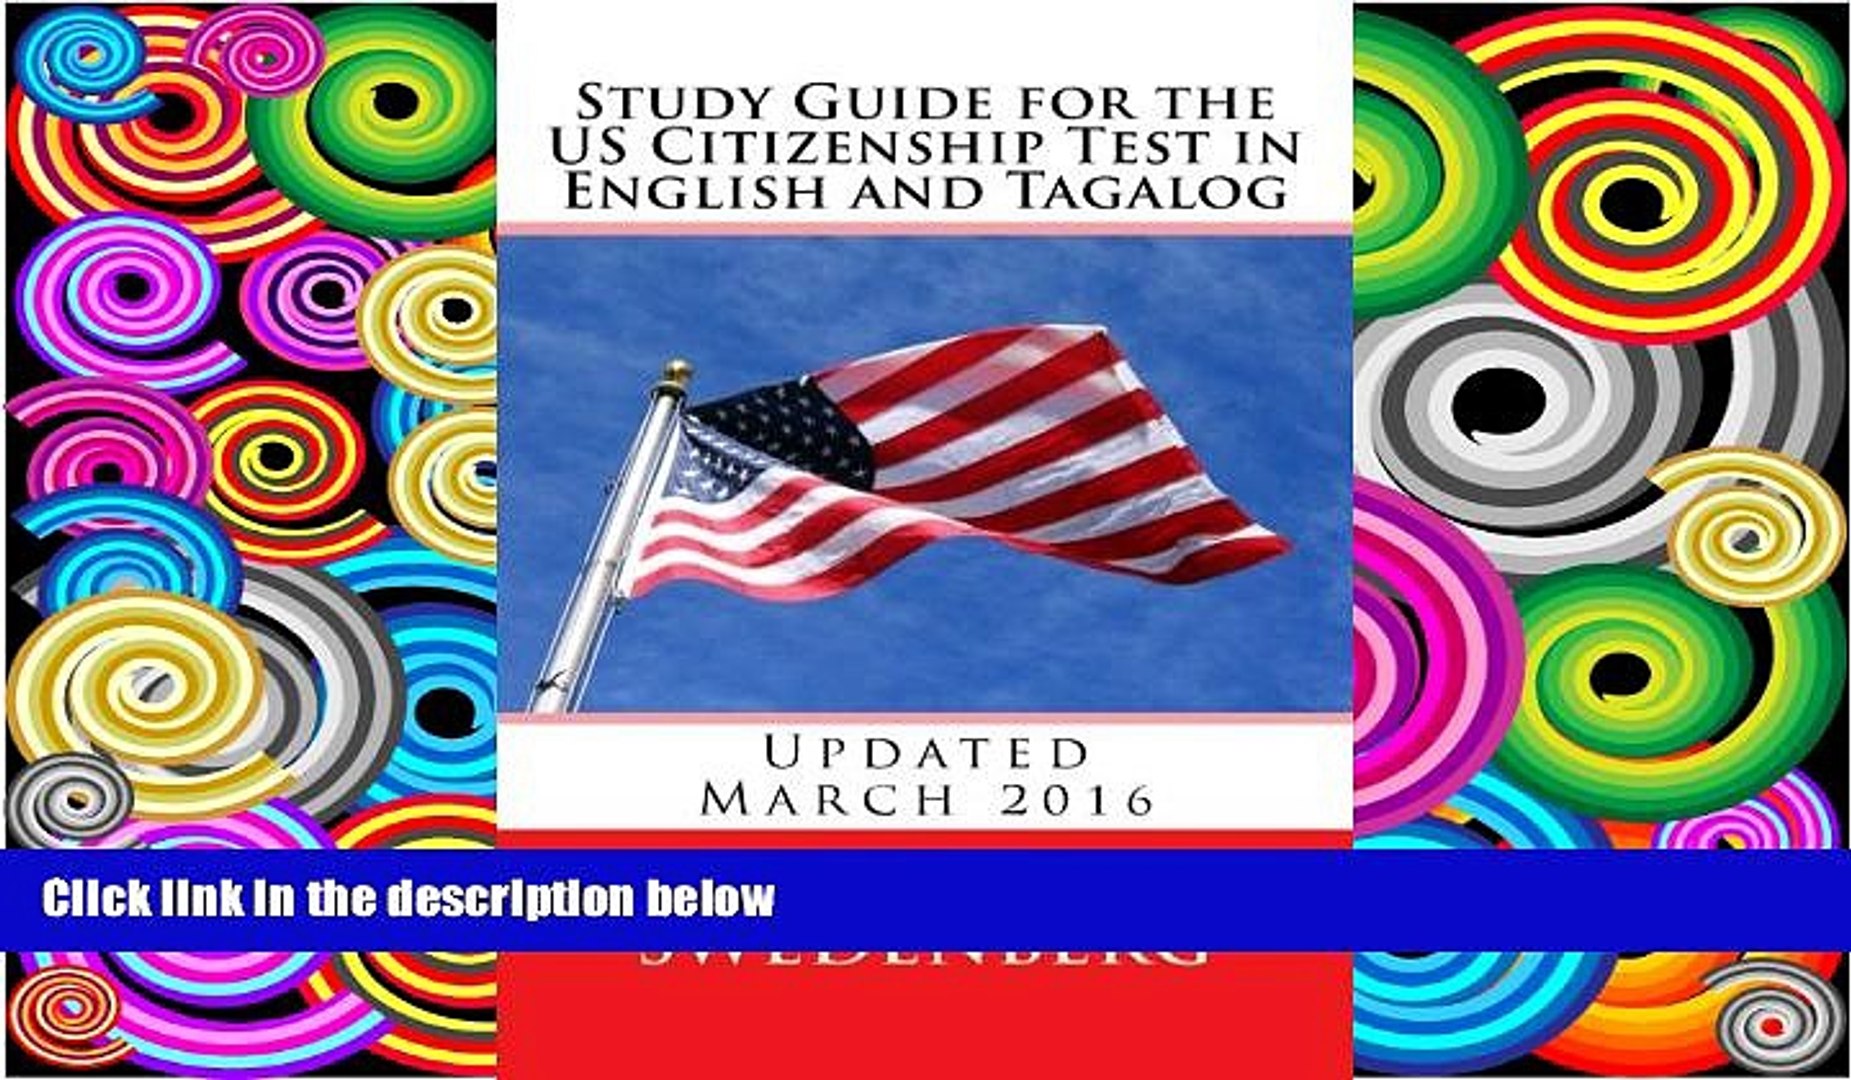 Buy Mike Swedenberg Study Guide for the US Citizenship Test in English and Tagalog: Updated March